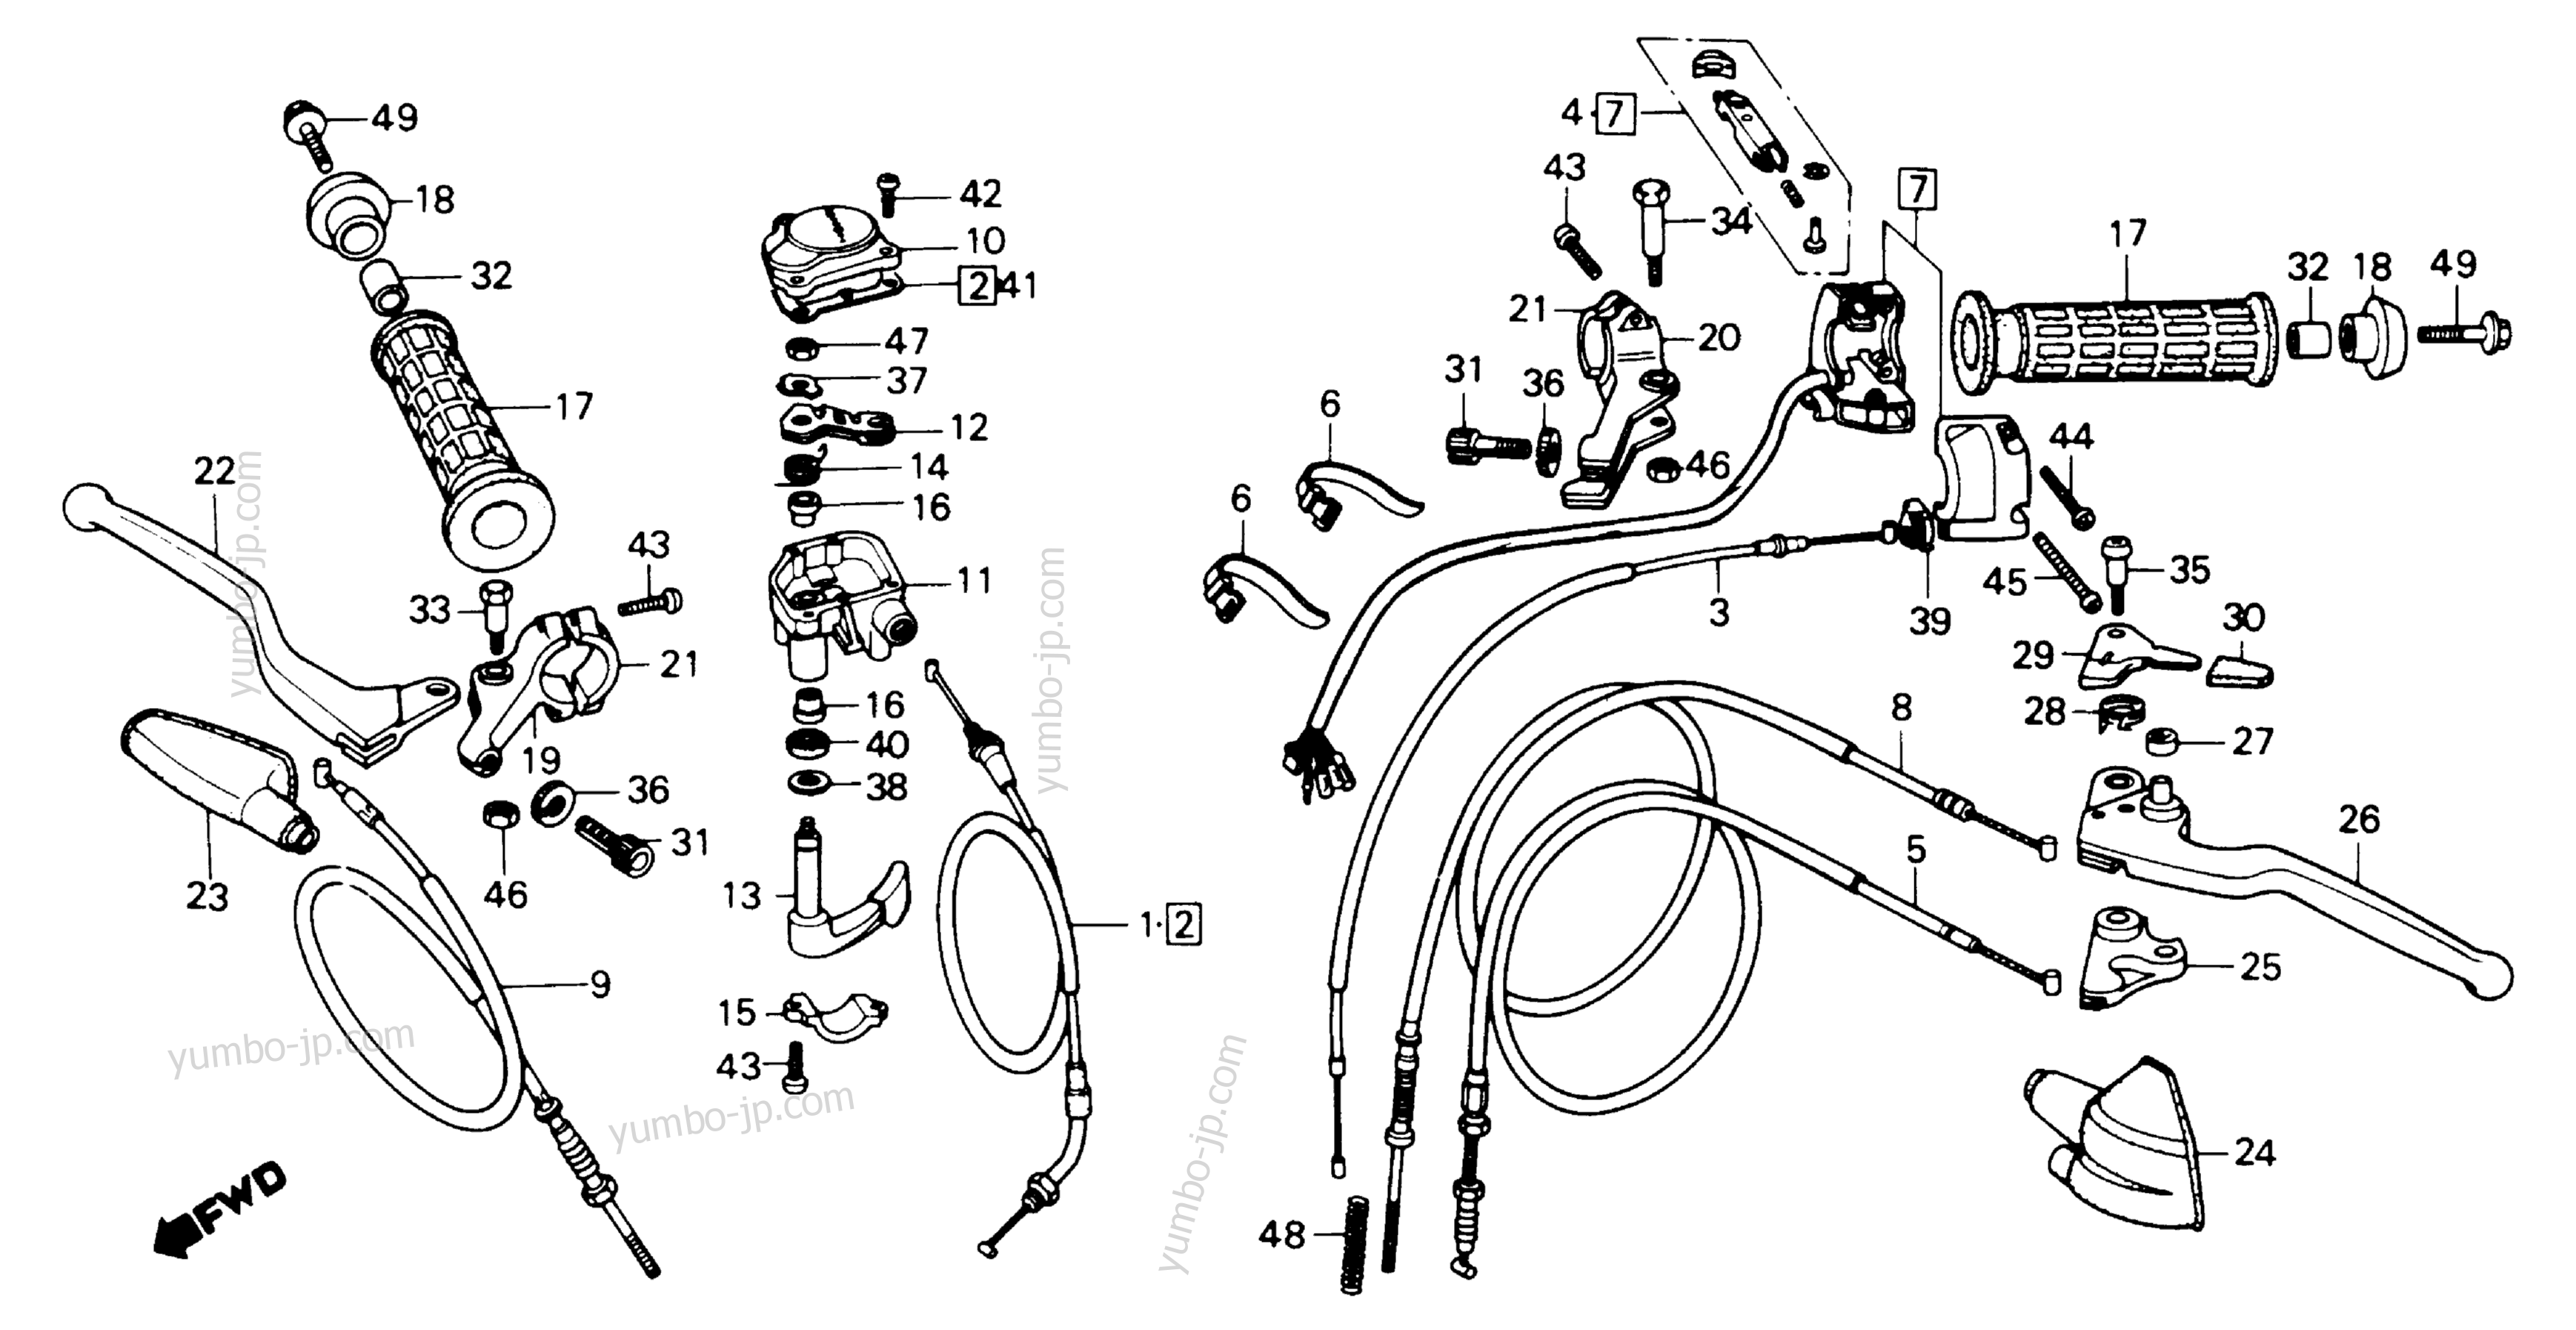 SWITCH / HANDLE LEVER / CABLE for ATVs HONDA ATC250SX A 1986 year